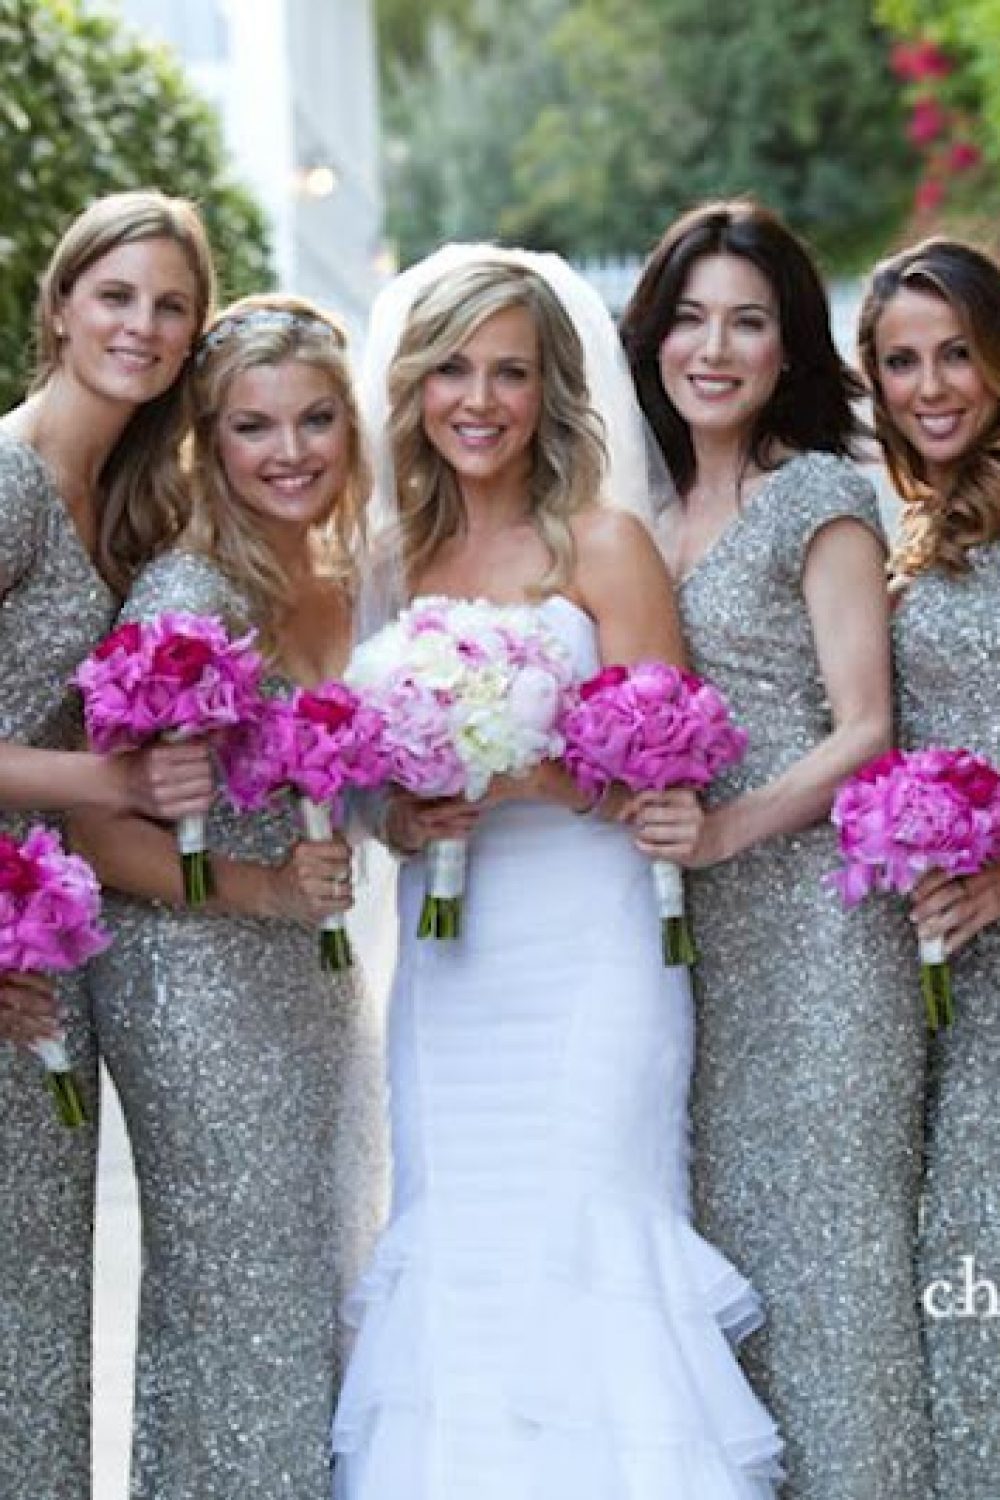 Julie Benz, What She Wore on Her Wedding Day